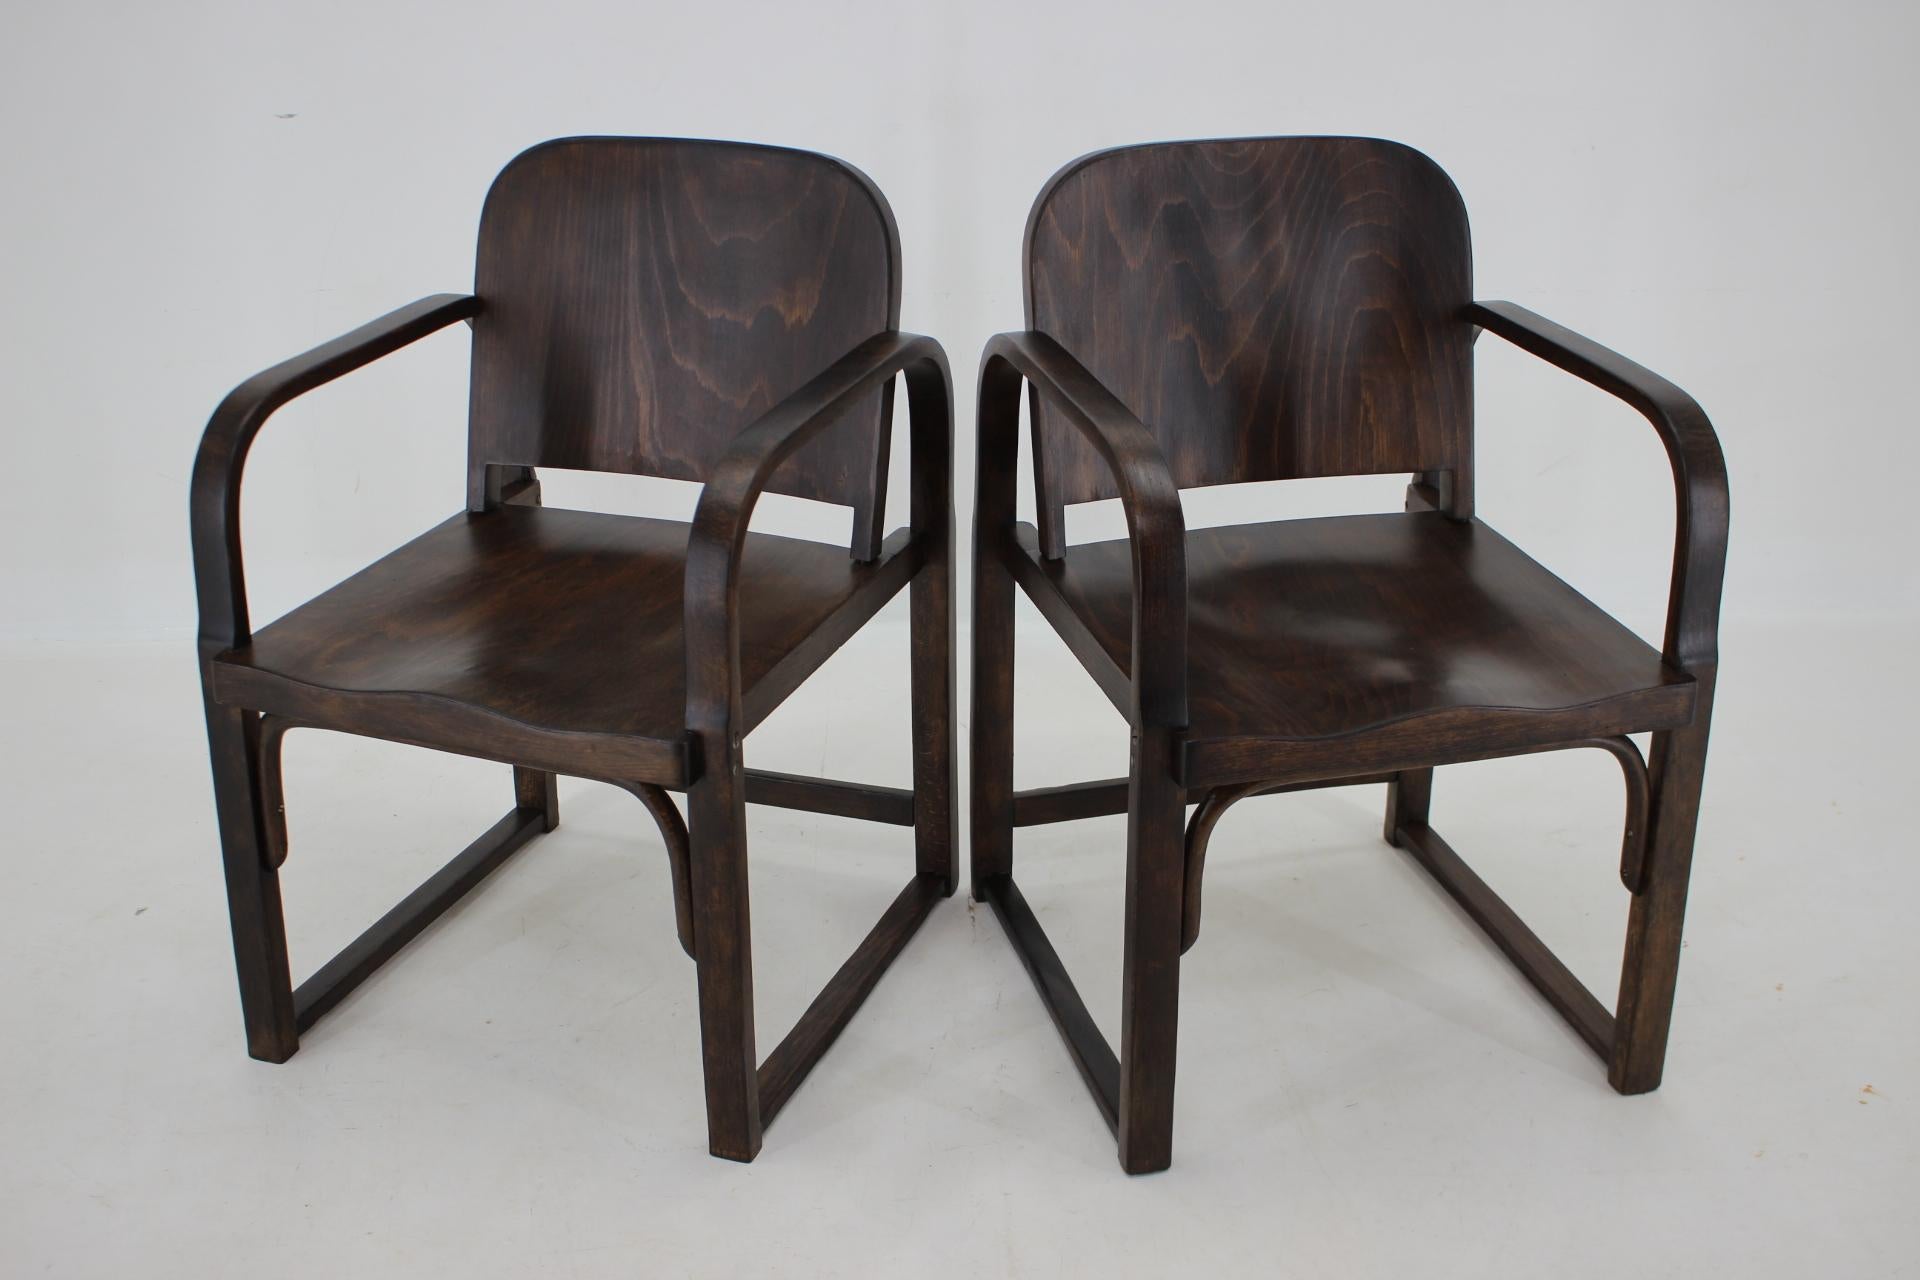 Mid-20th Century 1930s Pair of Thonet Bentwood Armchairs A745 by Tatra, Czechoslovakia For Sale